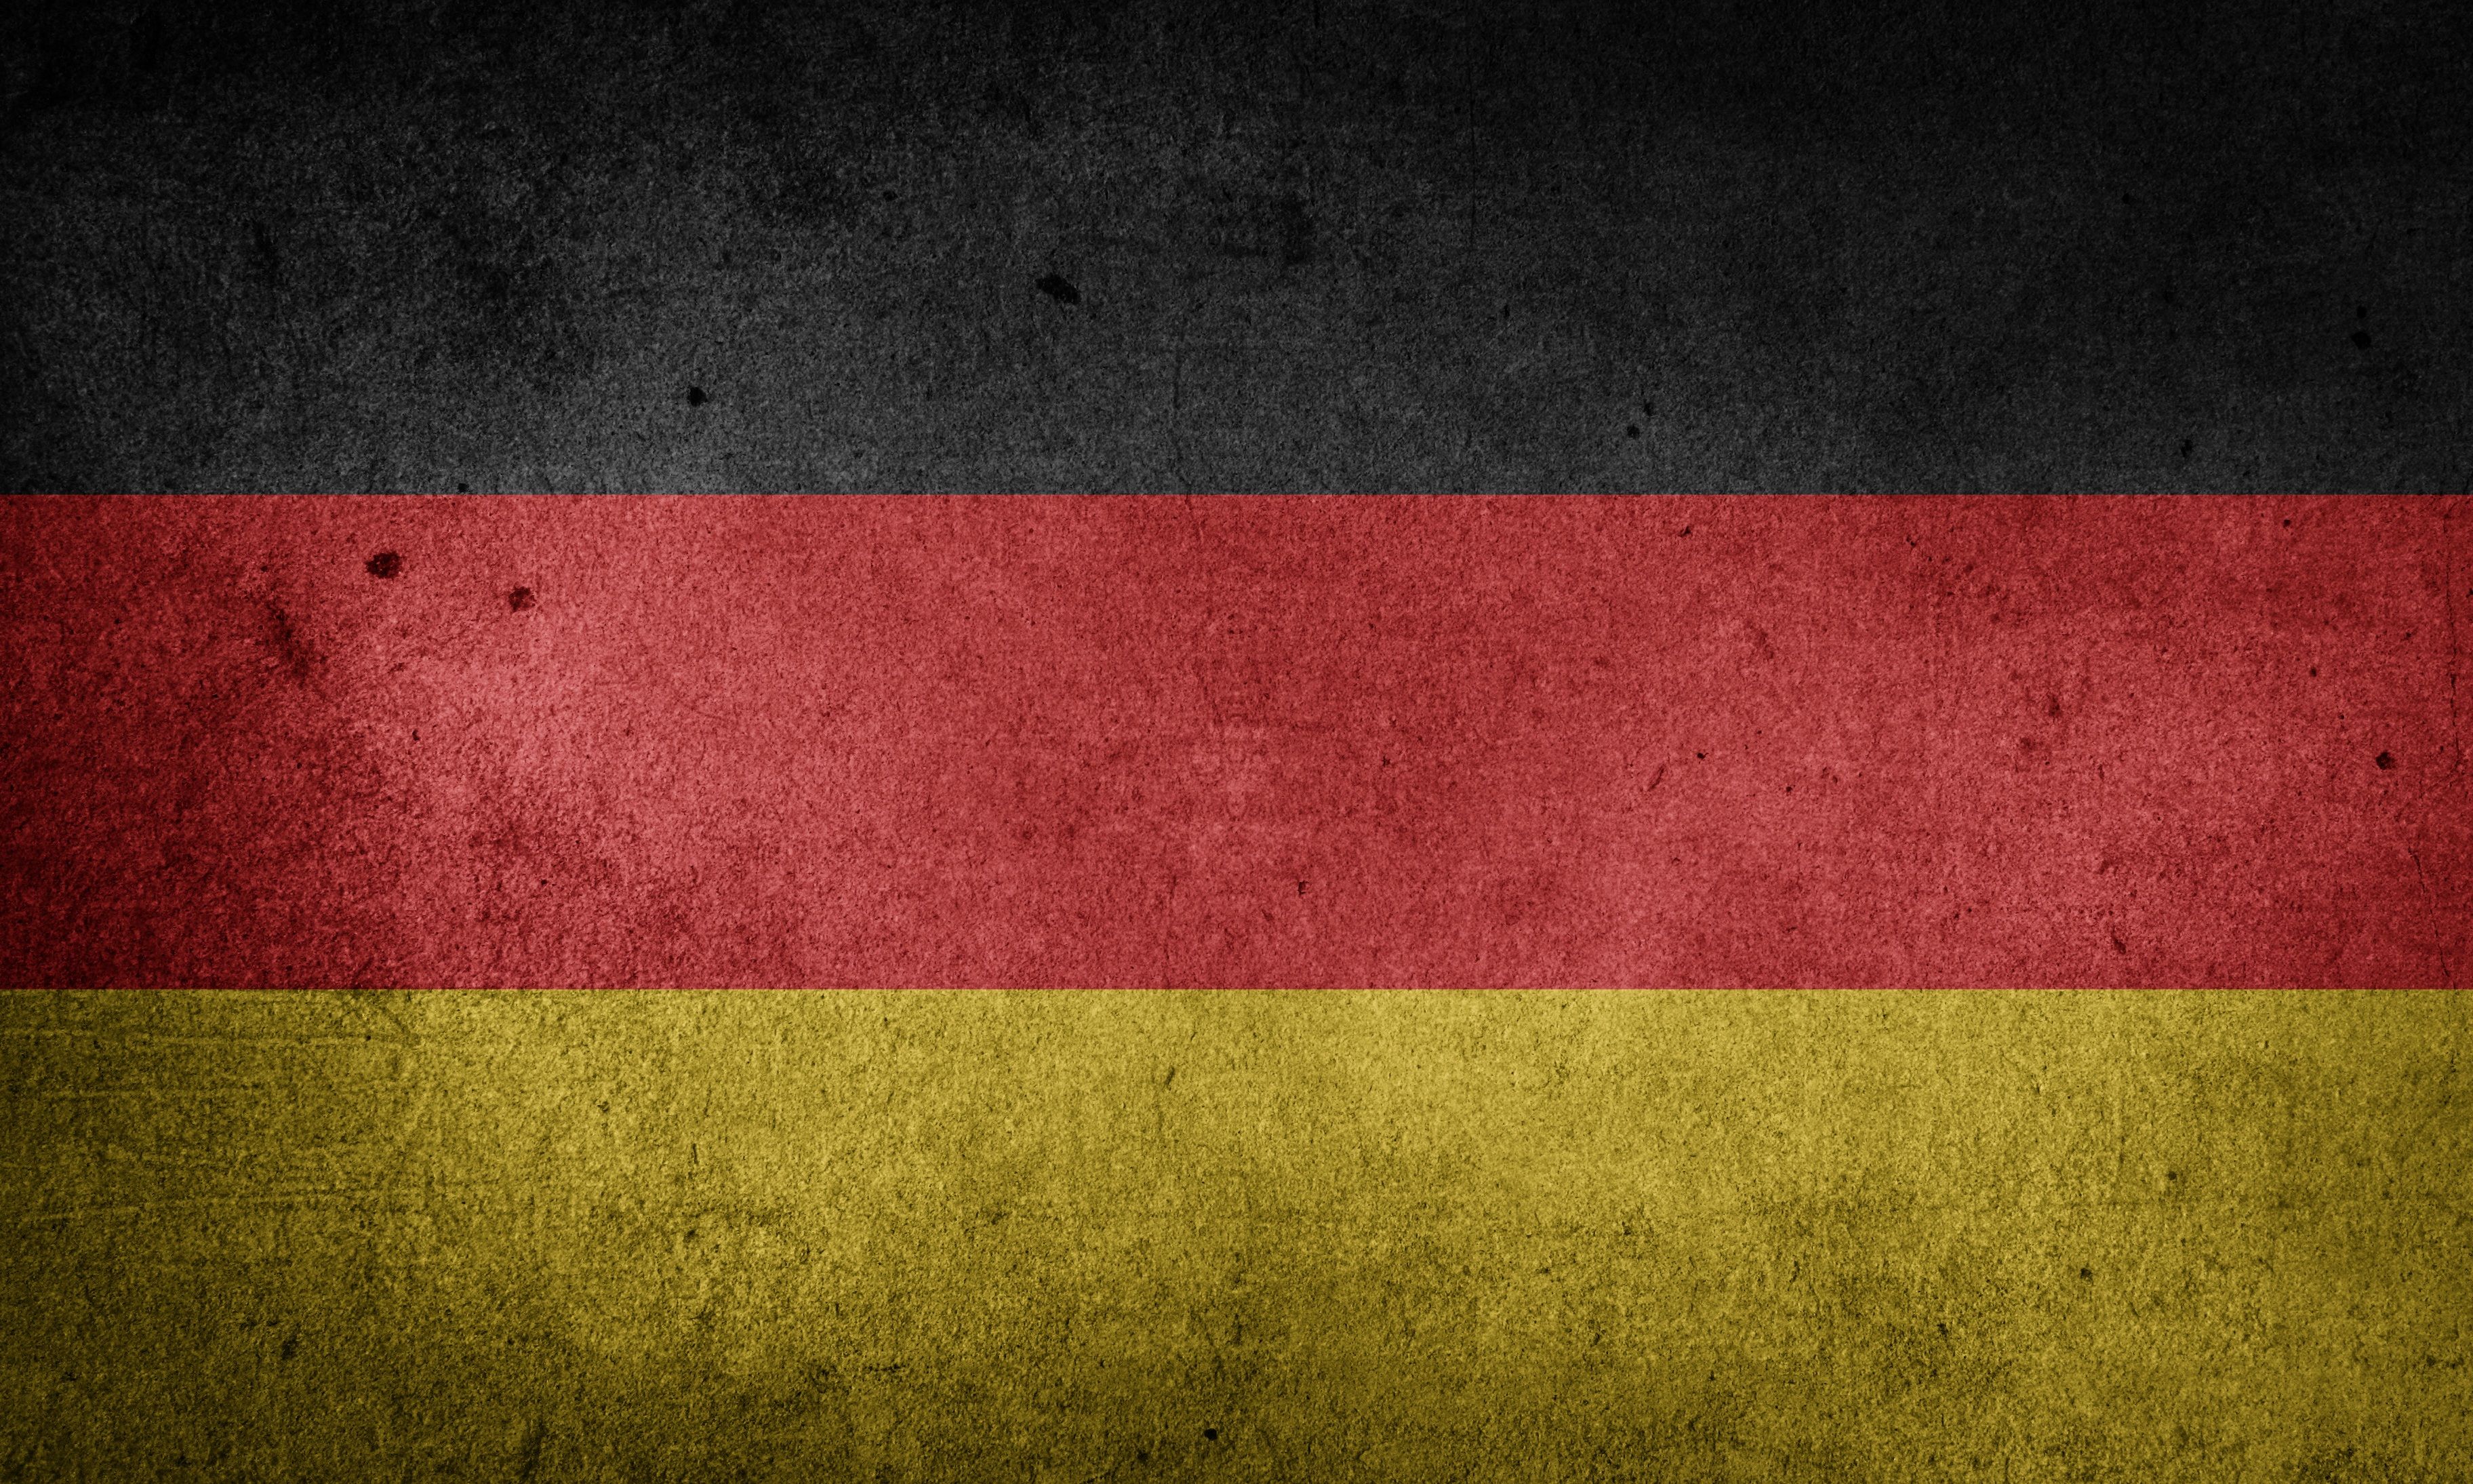 The Flag of Germany (Grunge) HD Wallpaper